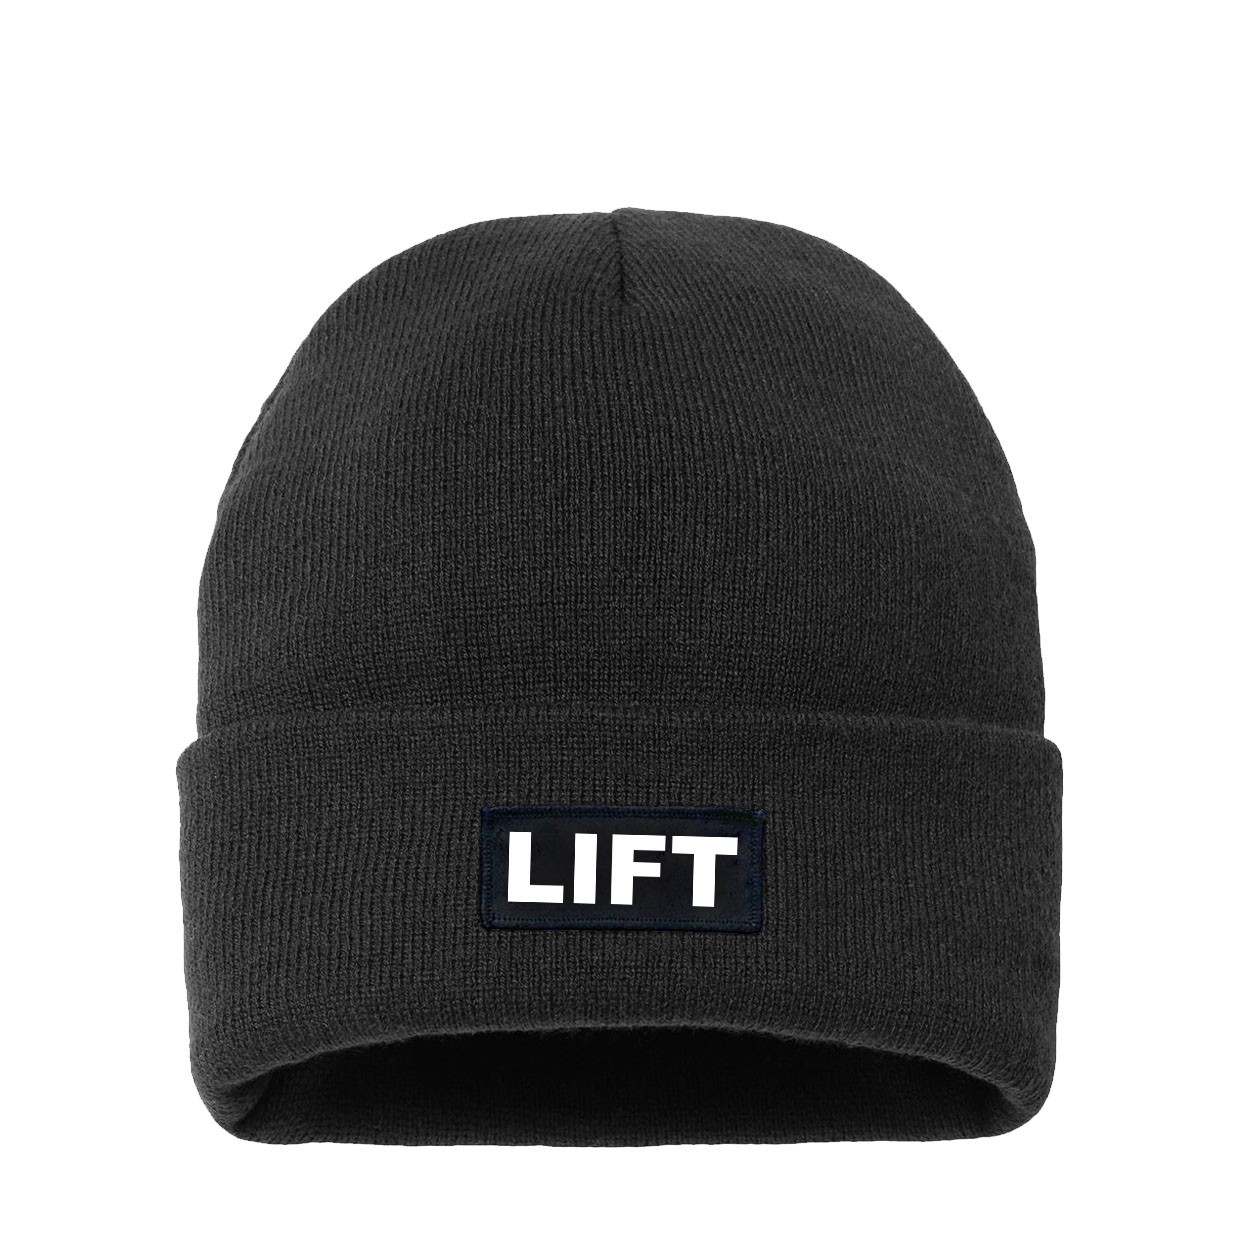 Lift Brand Logo Night Out Woven Patch Night Out Sherpa Lined Cuffed Beanie Black